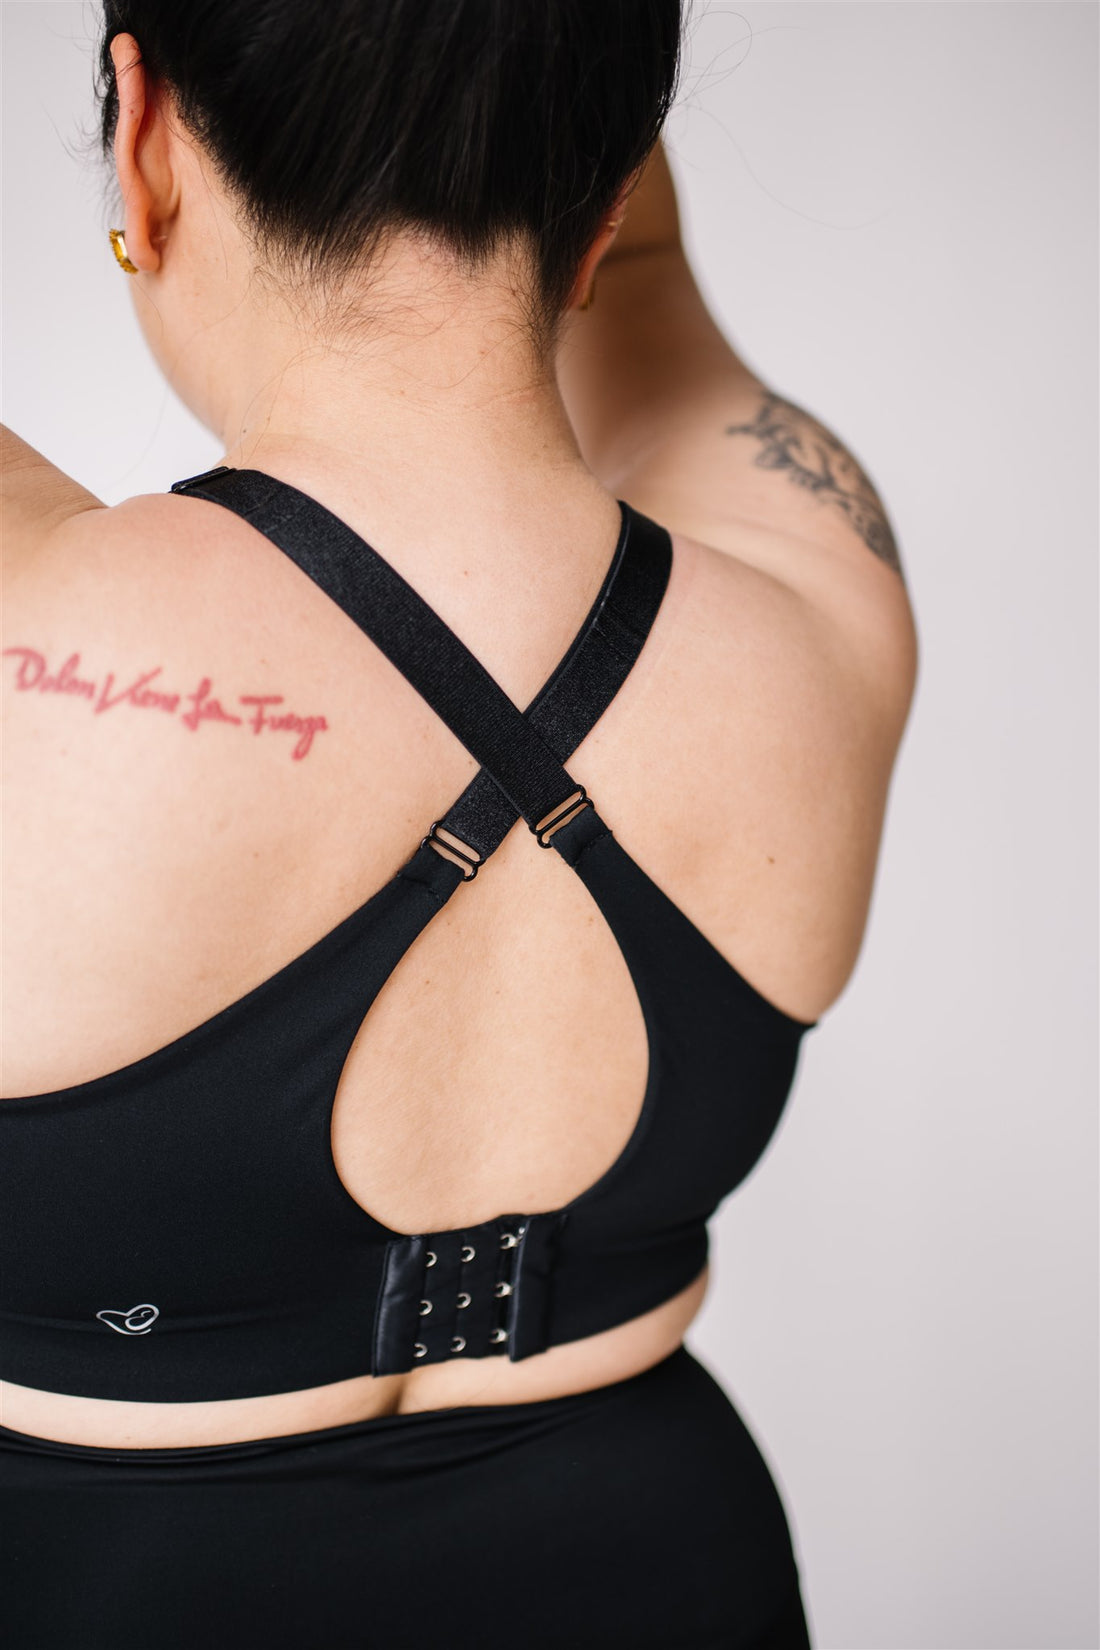 Stay stylish and comfortable with the New Joy Lab Melon High Neck Zip Front Sports  Bra